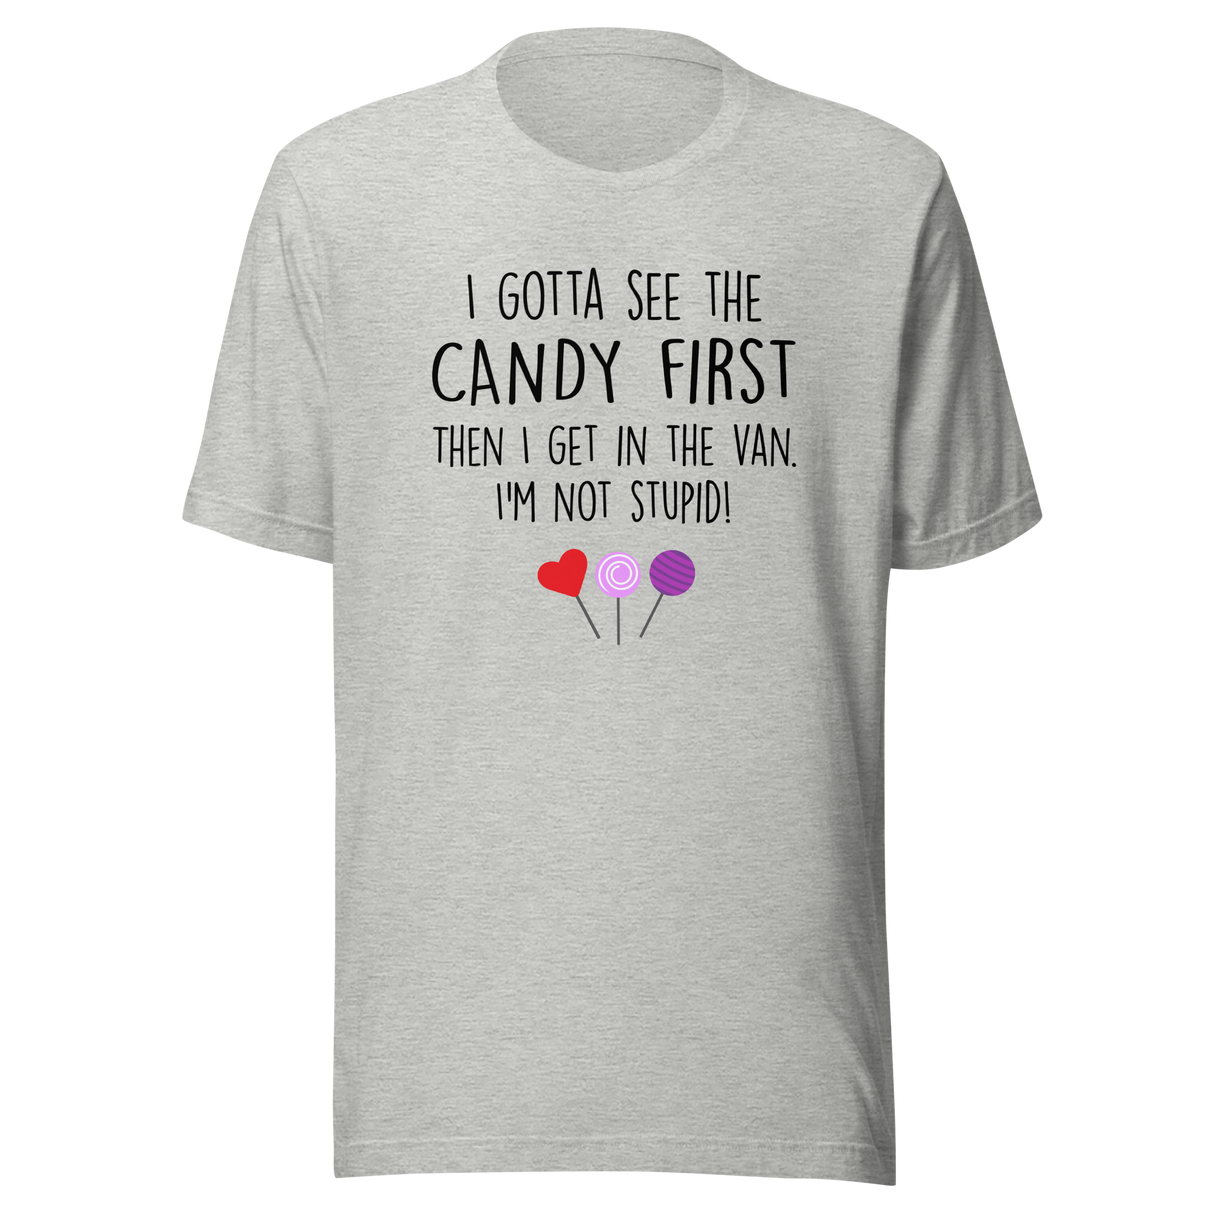 i-gotta-see-the-candy-first-then-i-get-in-the-van-im-not-stupid-funny-tee-candy-t-shirt-van-tee-t-shirt-tee#color_athletic-heather